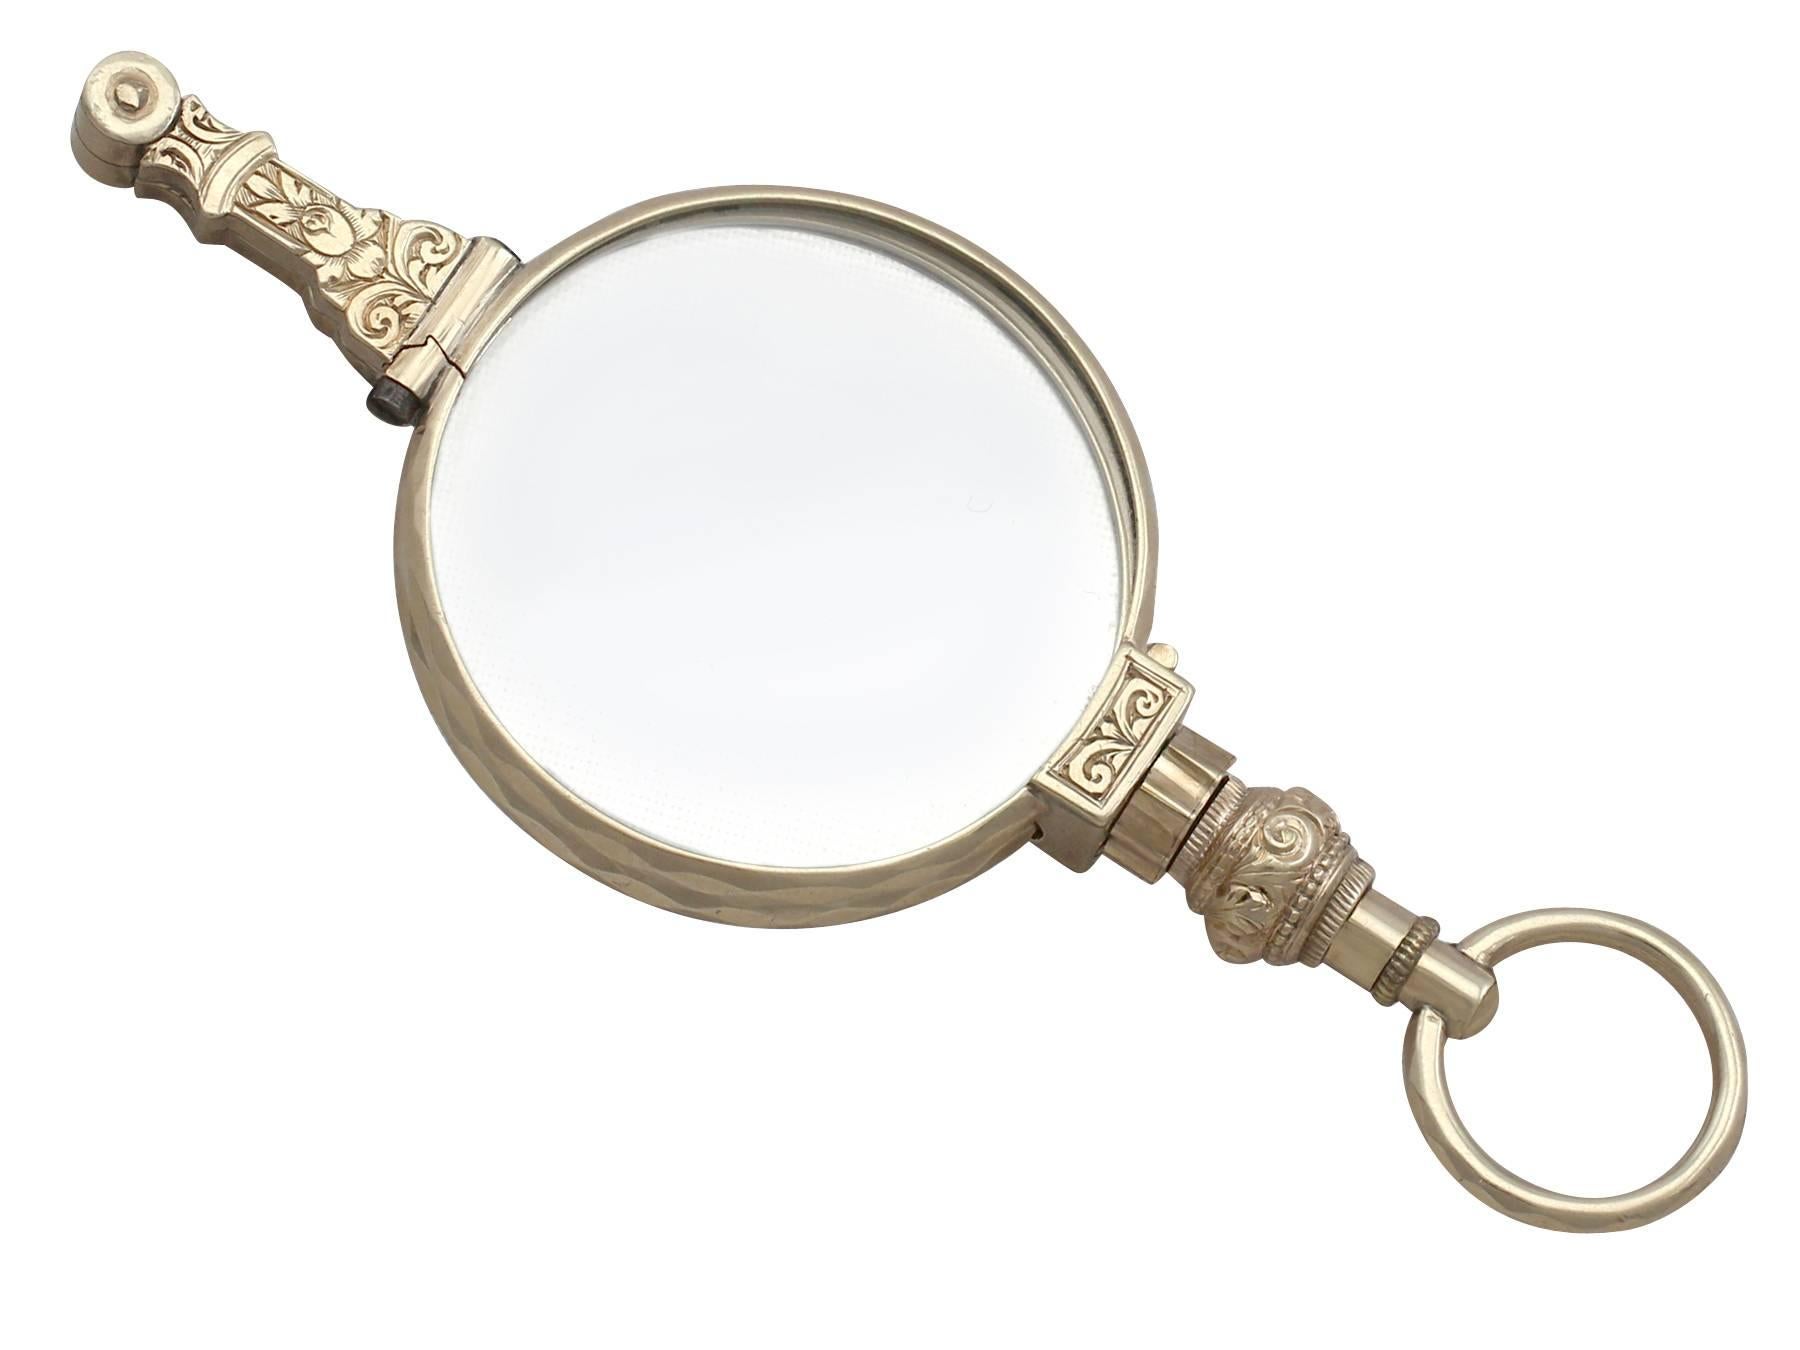 A fine and impressive antique Victorian 9k yellow gold lorgnette; part of our diverse range of collectables.

 These fine and impressive antique Victorian lorgnette has been crafted in 9 k yellow gold.

The frame of these folding eyeglasses has been